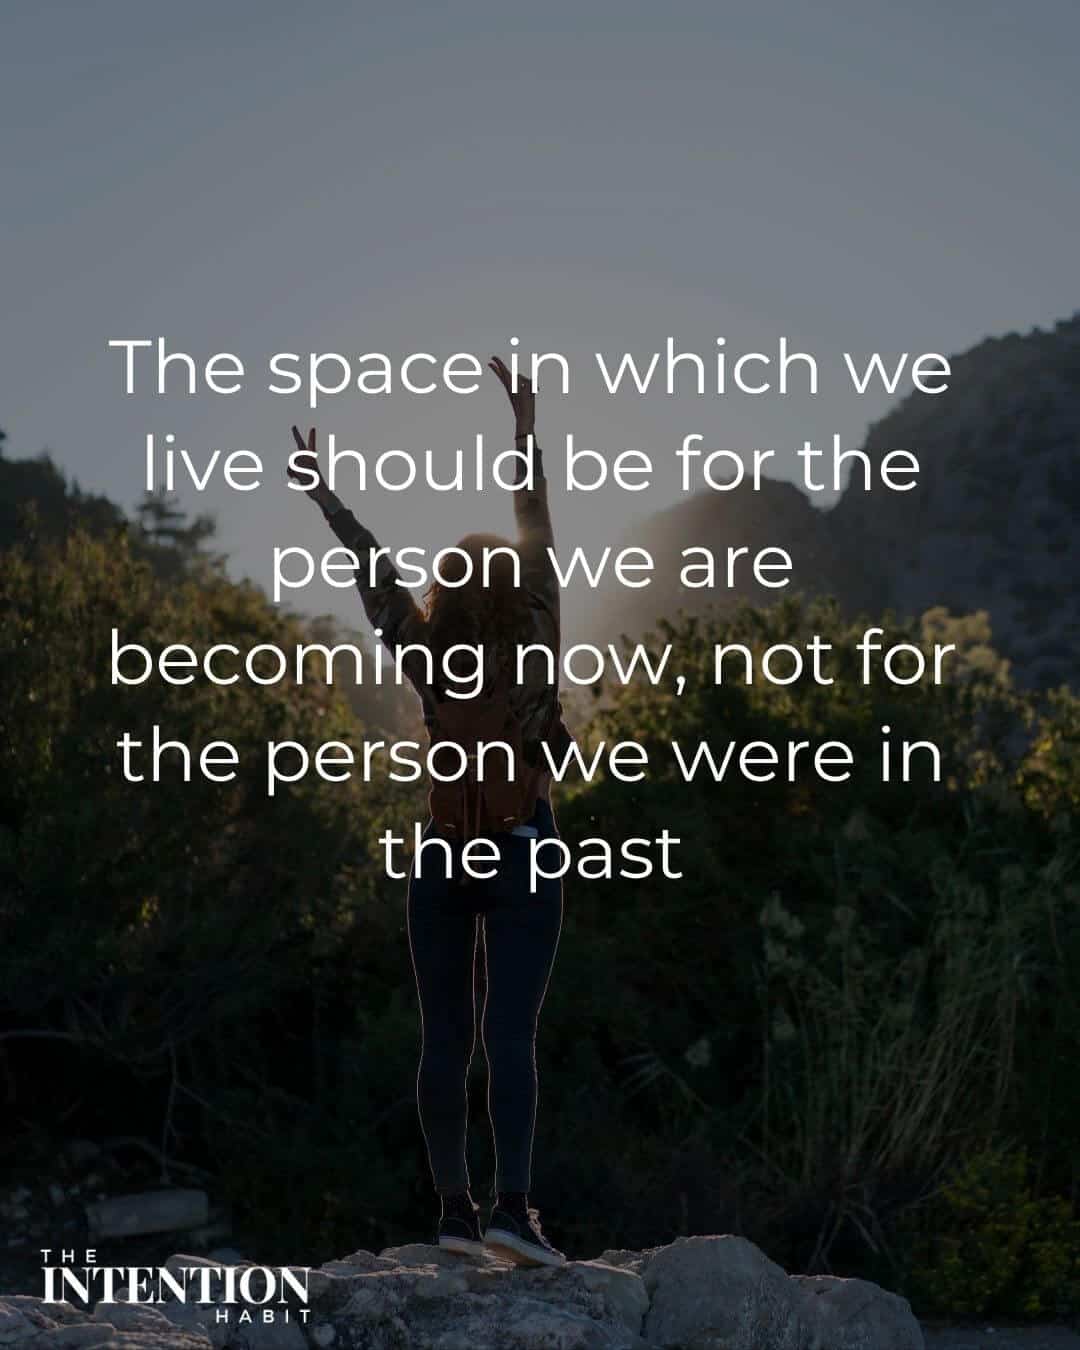 the space in which we live should be for the person we are becoming now, not for the person we were in the past